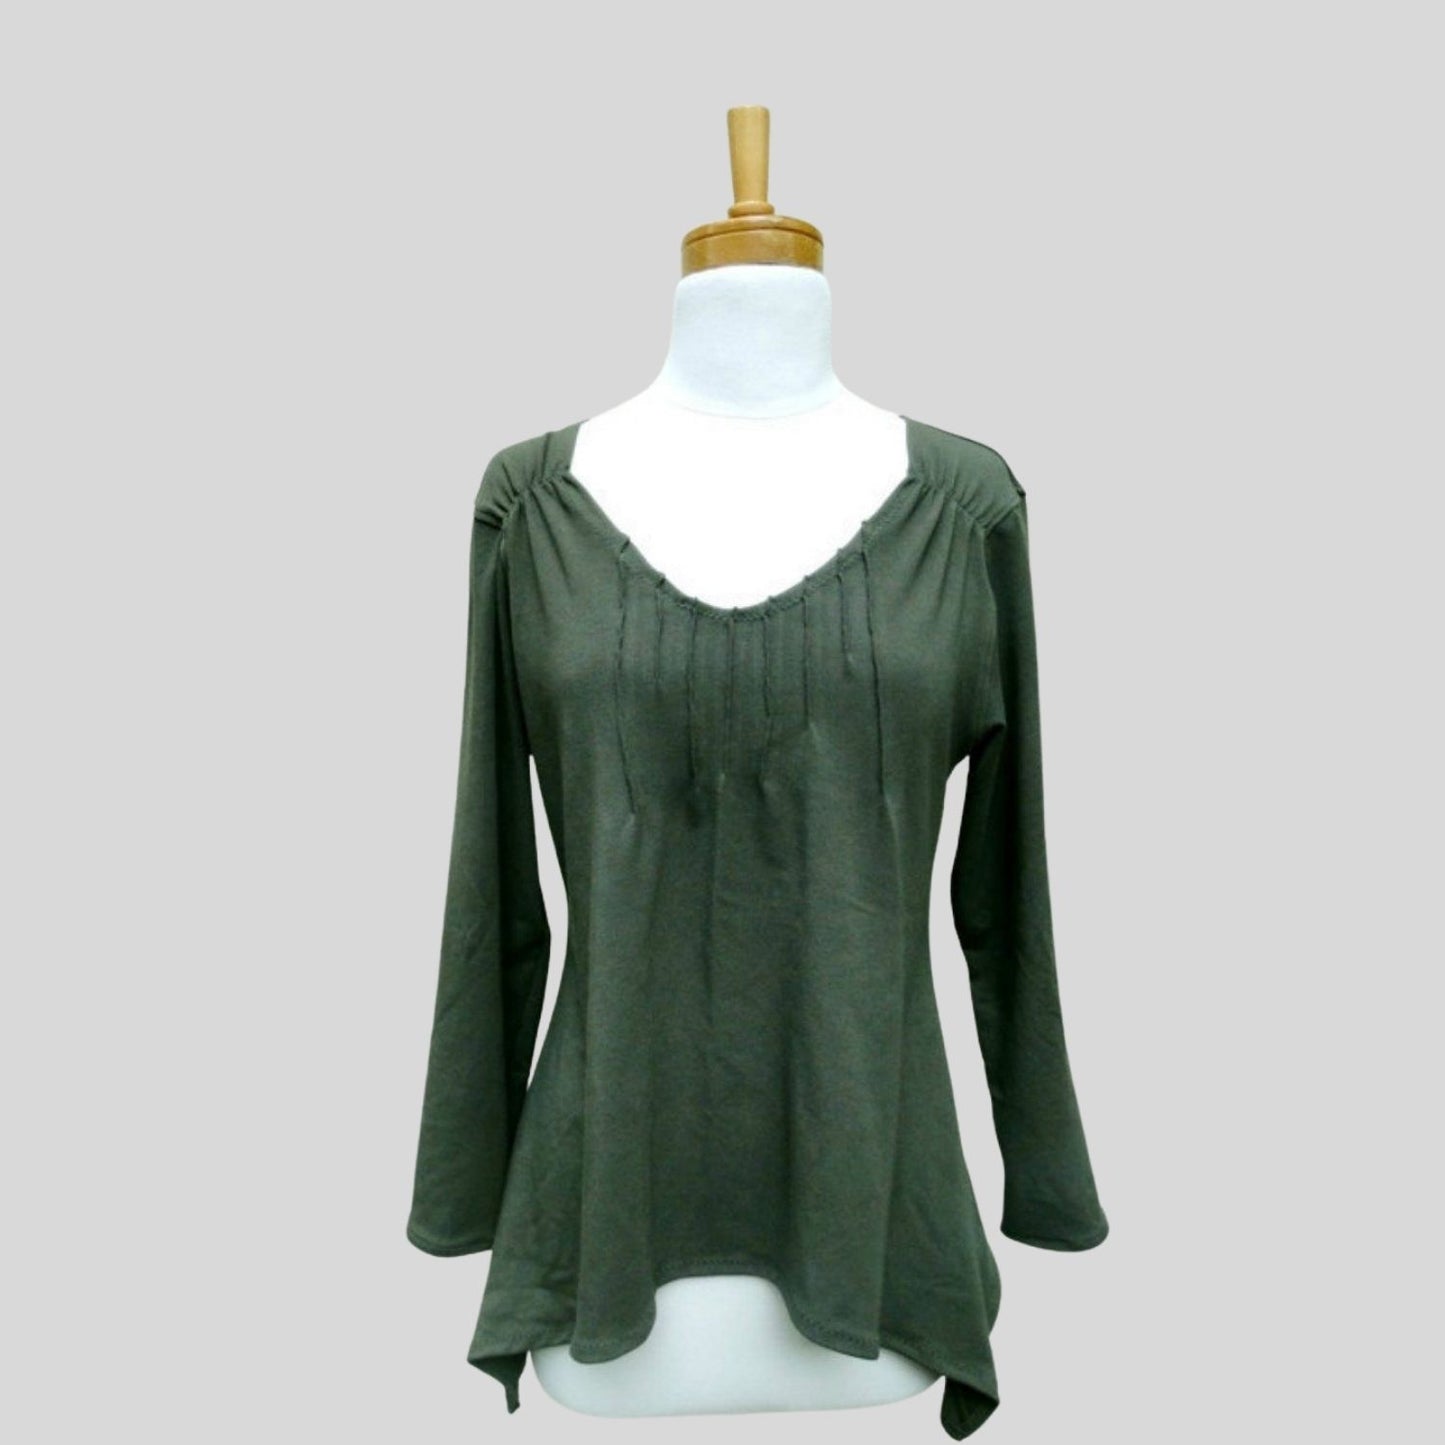 Flare tunic top green | Organic cotton tunic top with cinched shoulders | Made in Canada organic cotton tunic tops for women | Econica